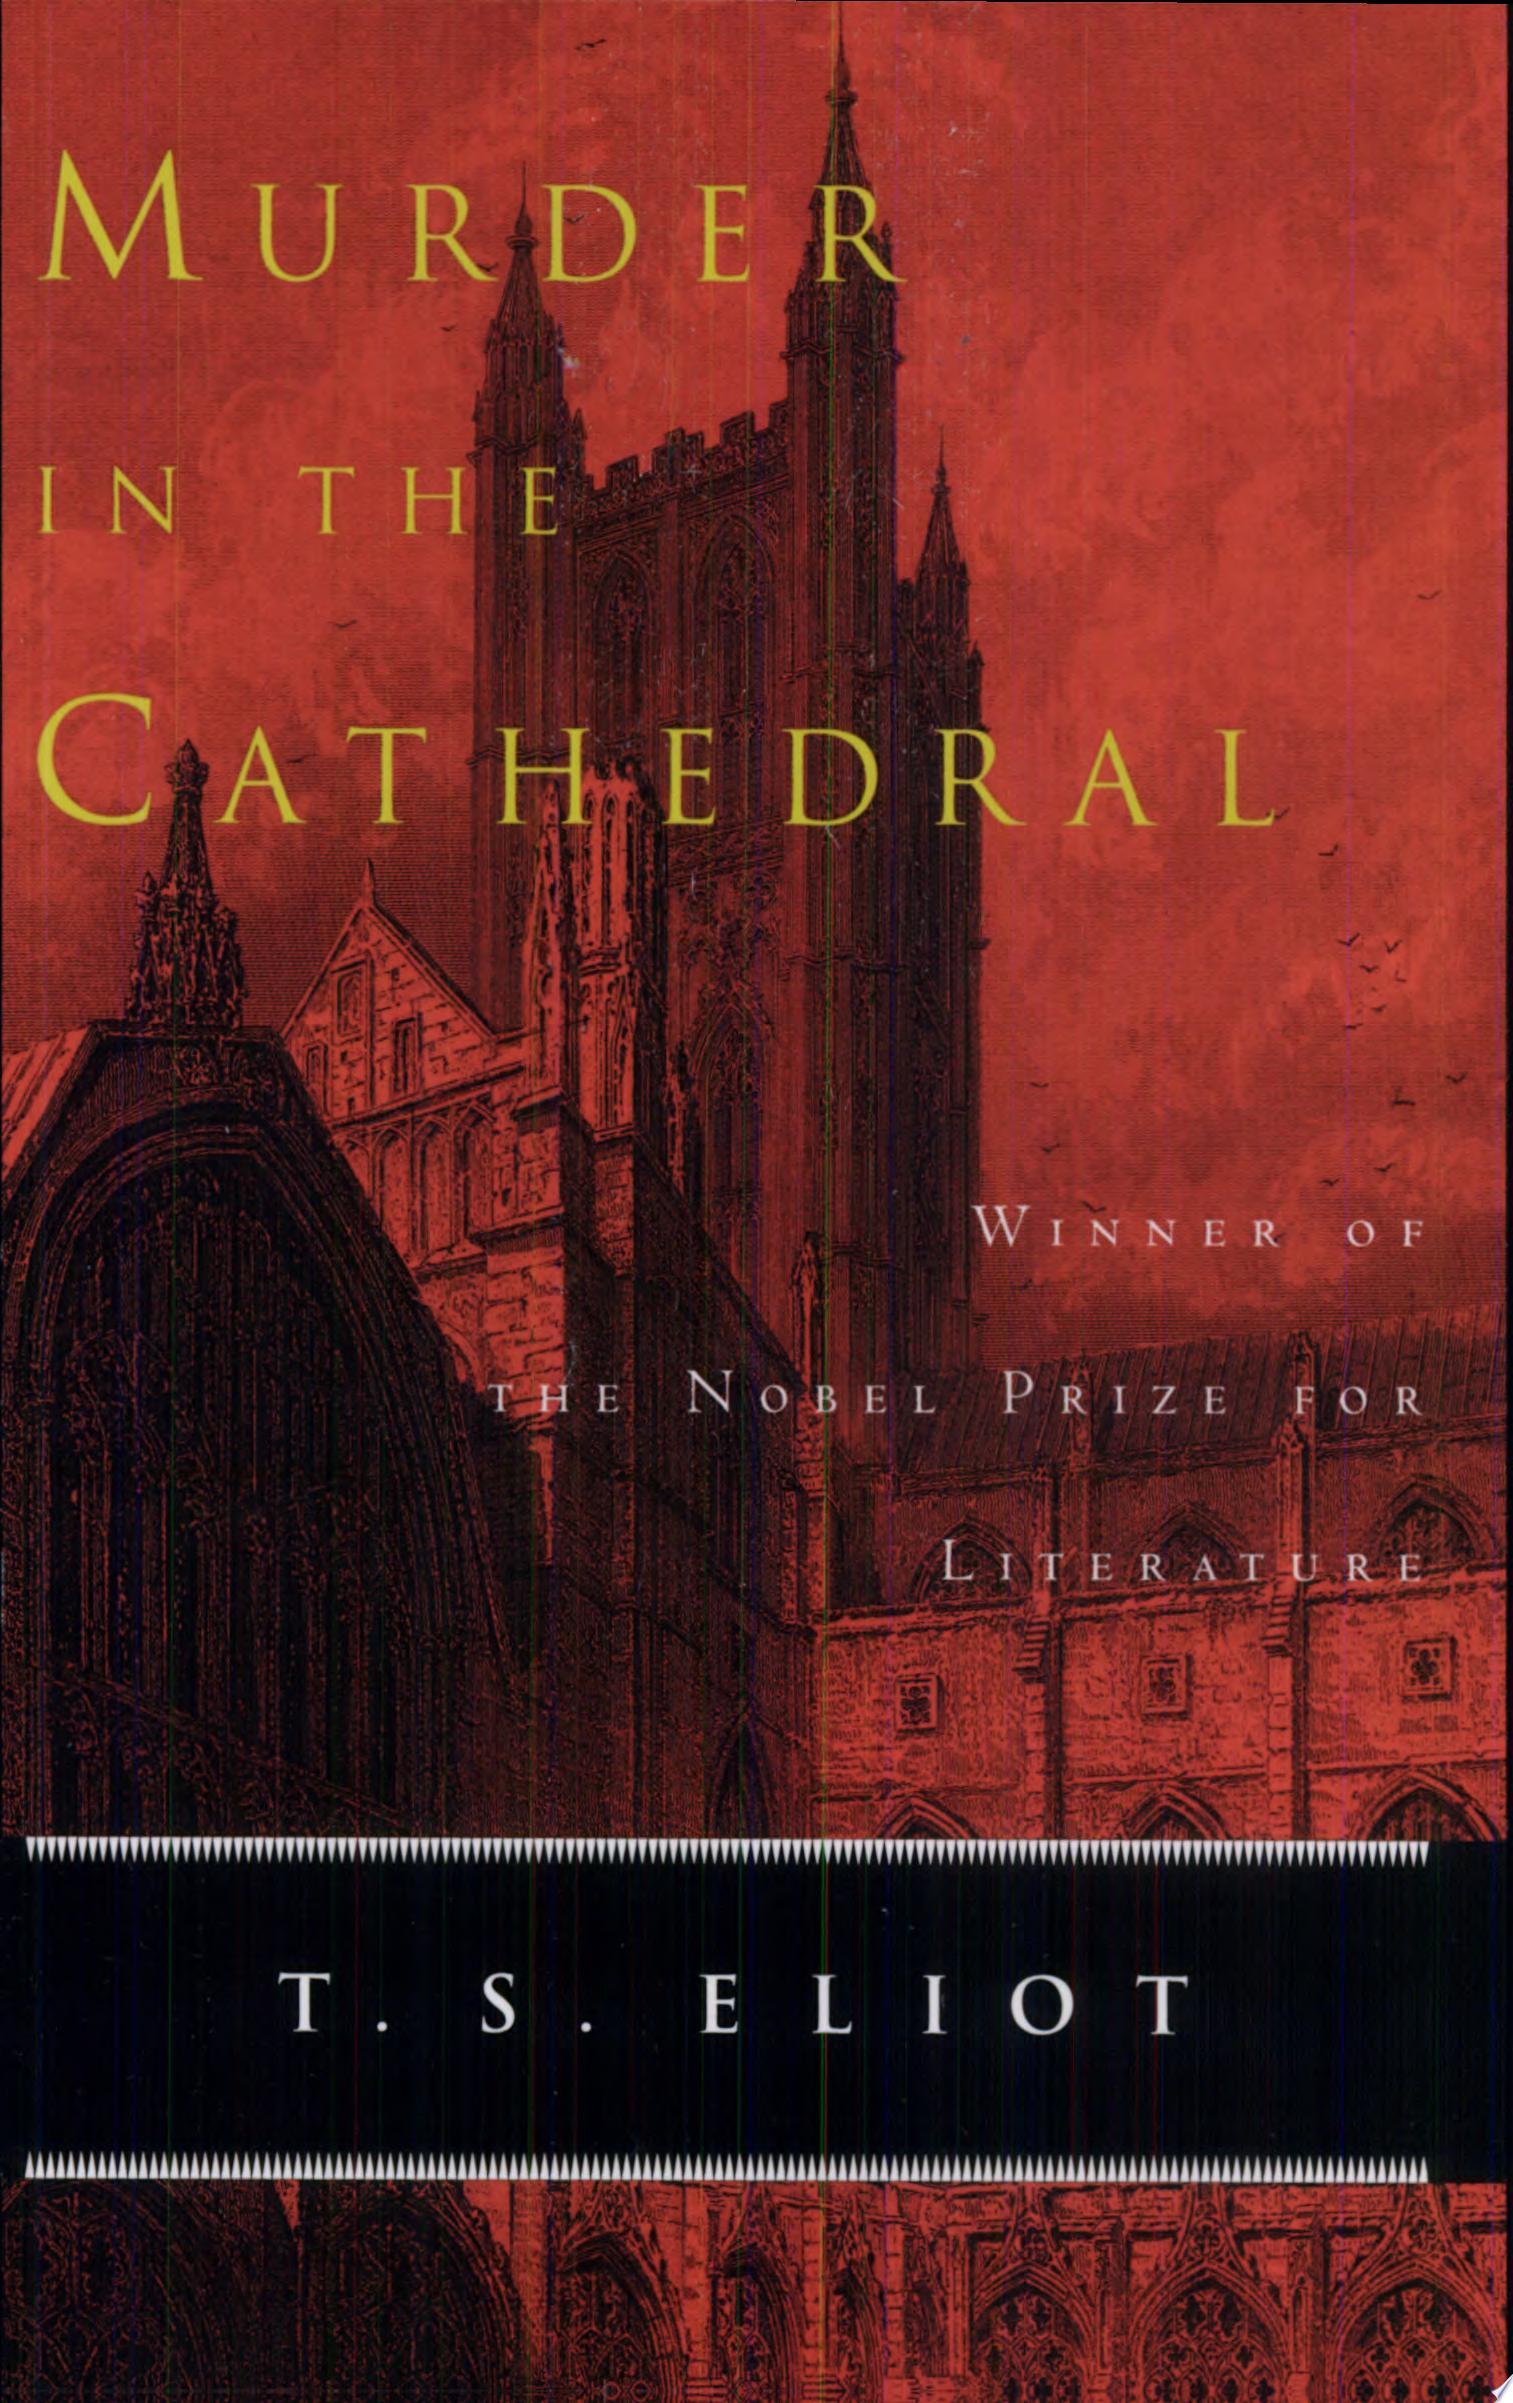 Image for "Murder in the Cathedral"